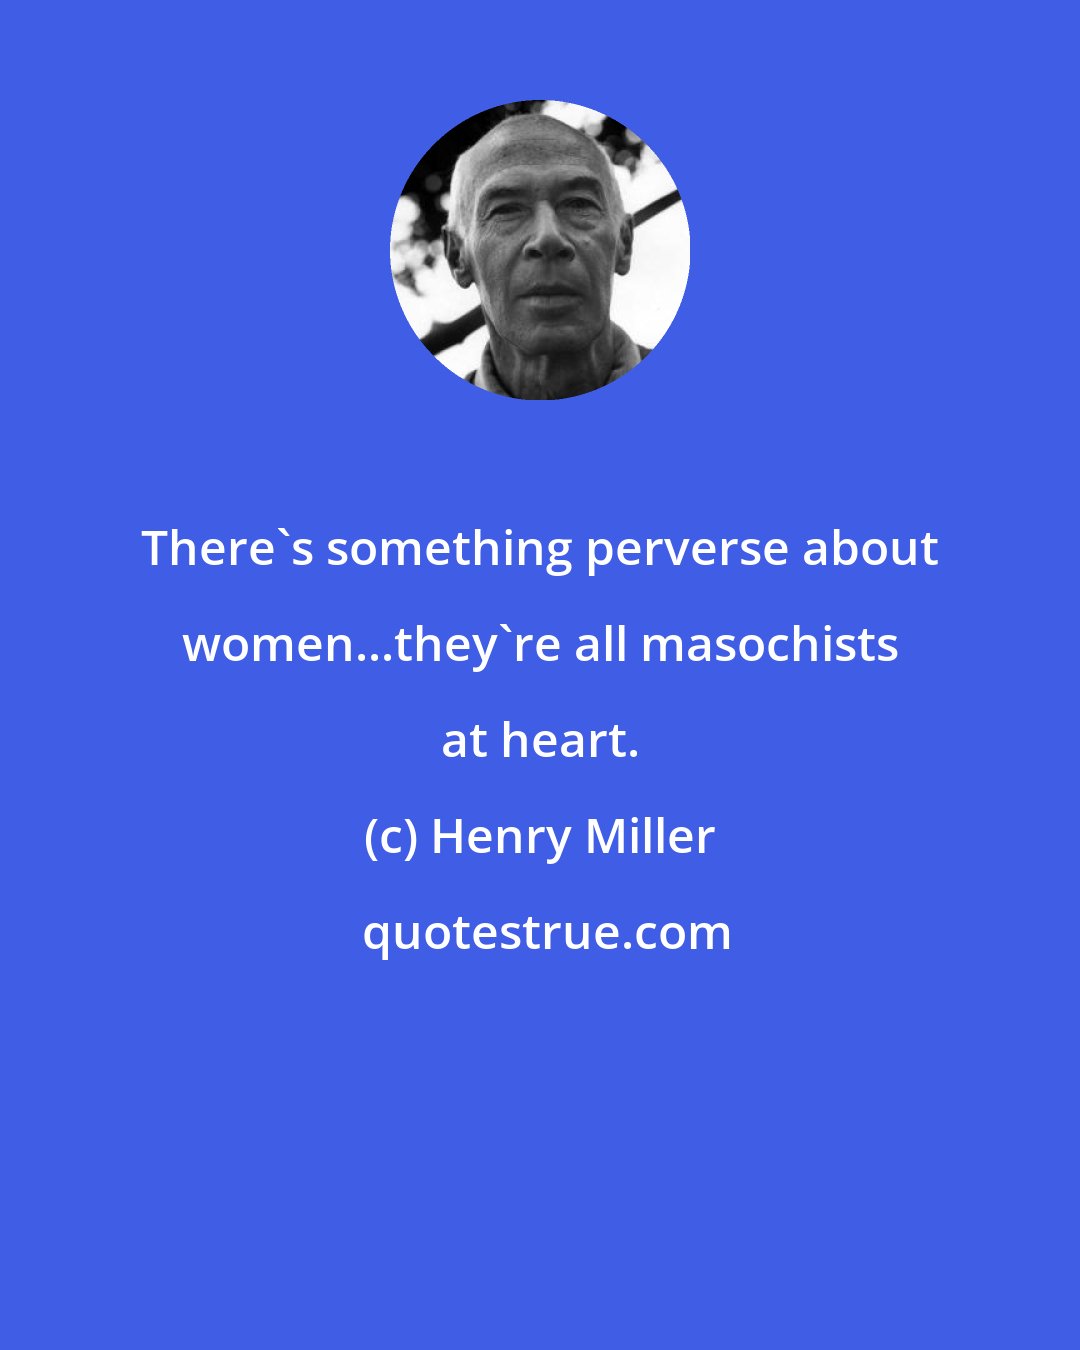 Henry Miller: There's something perverse about women...they're all masochists at heart.